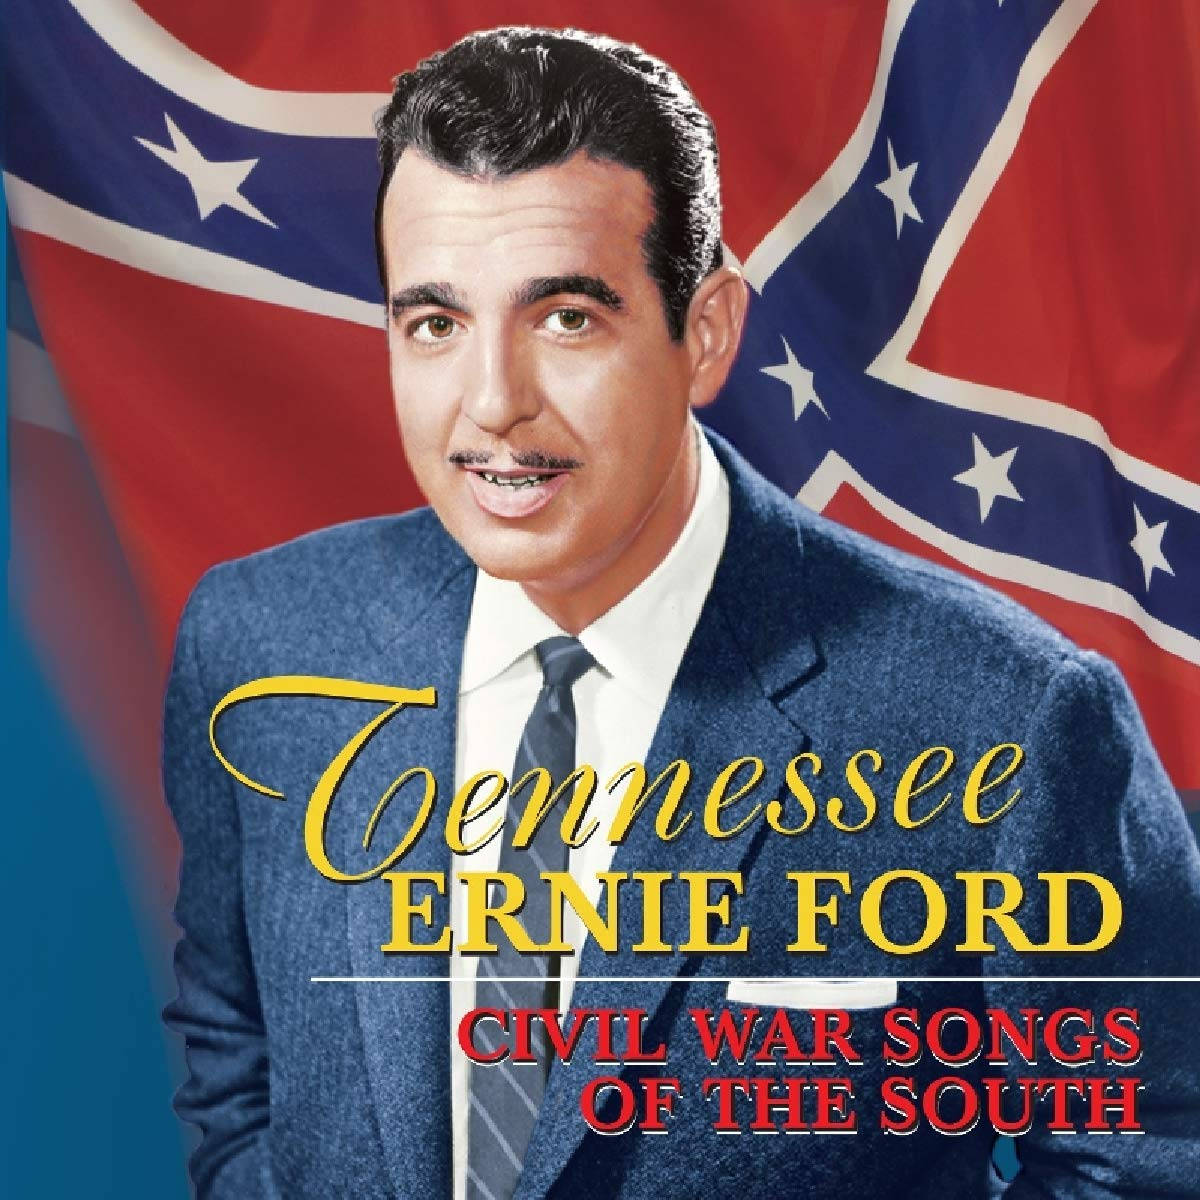 Tennessee Ernie Ford Civil War Songs Of The South Album Picture